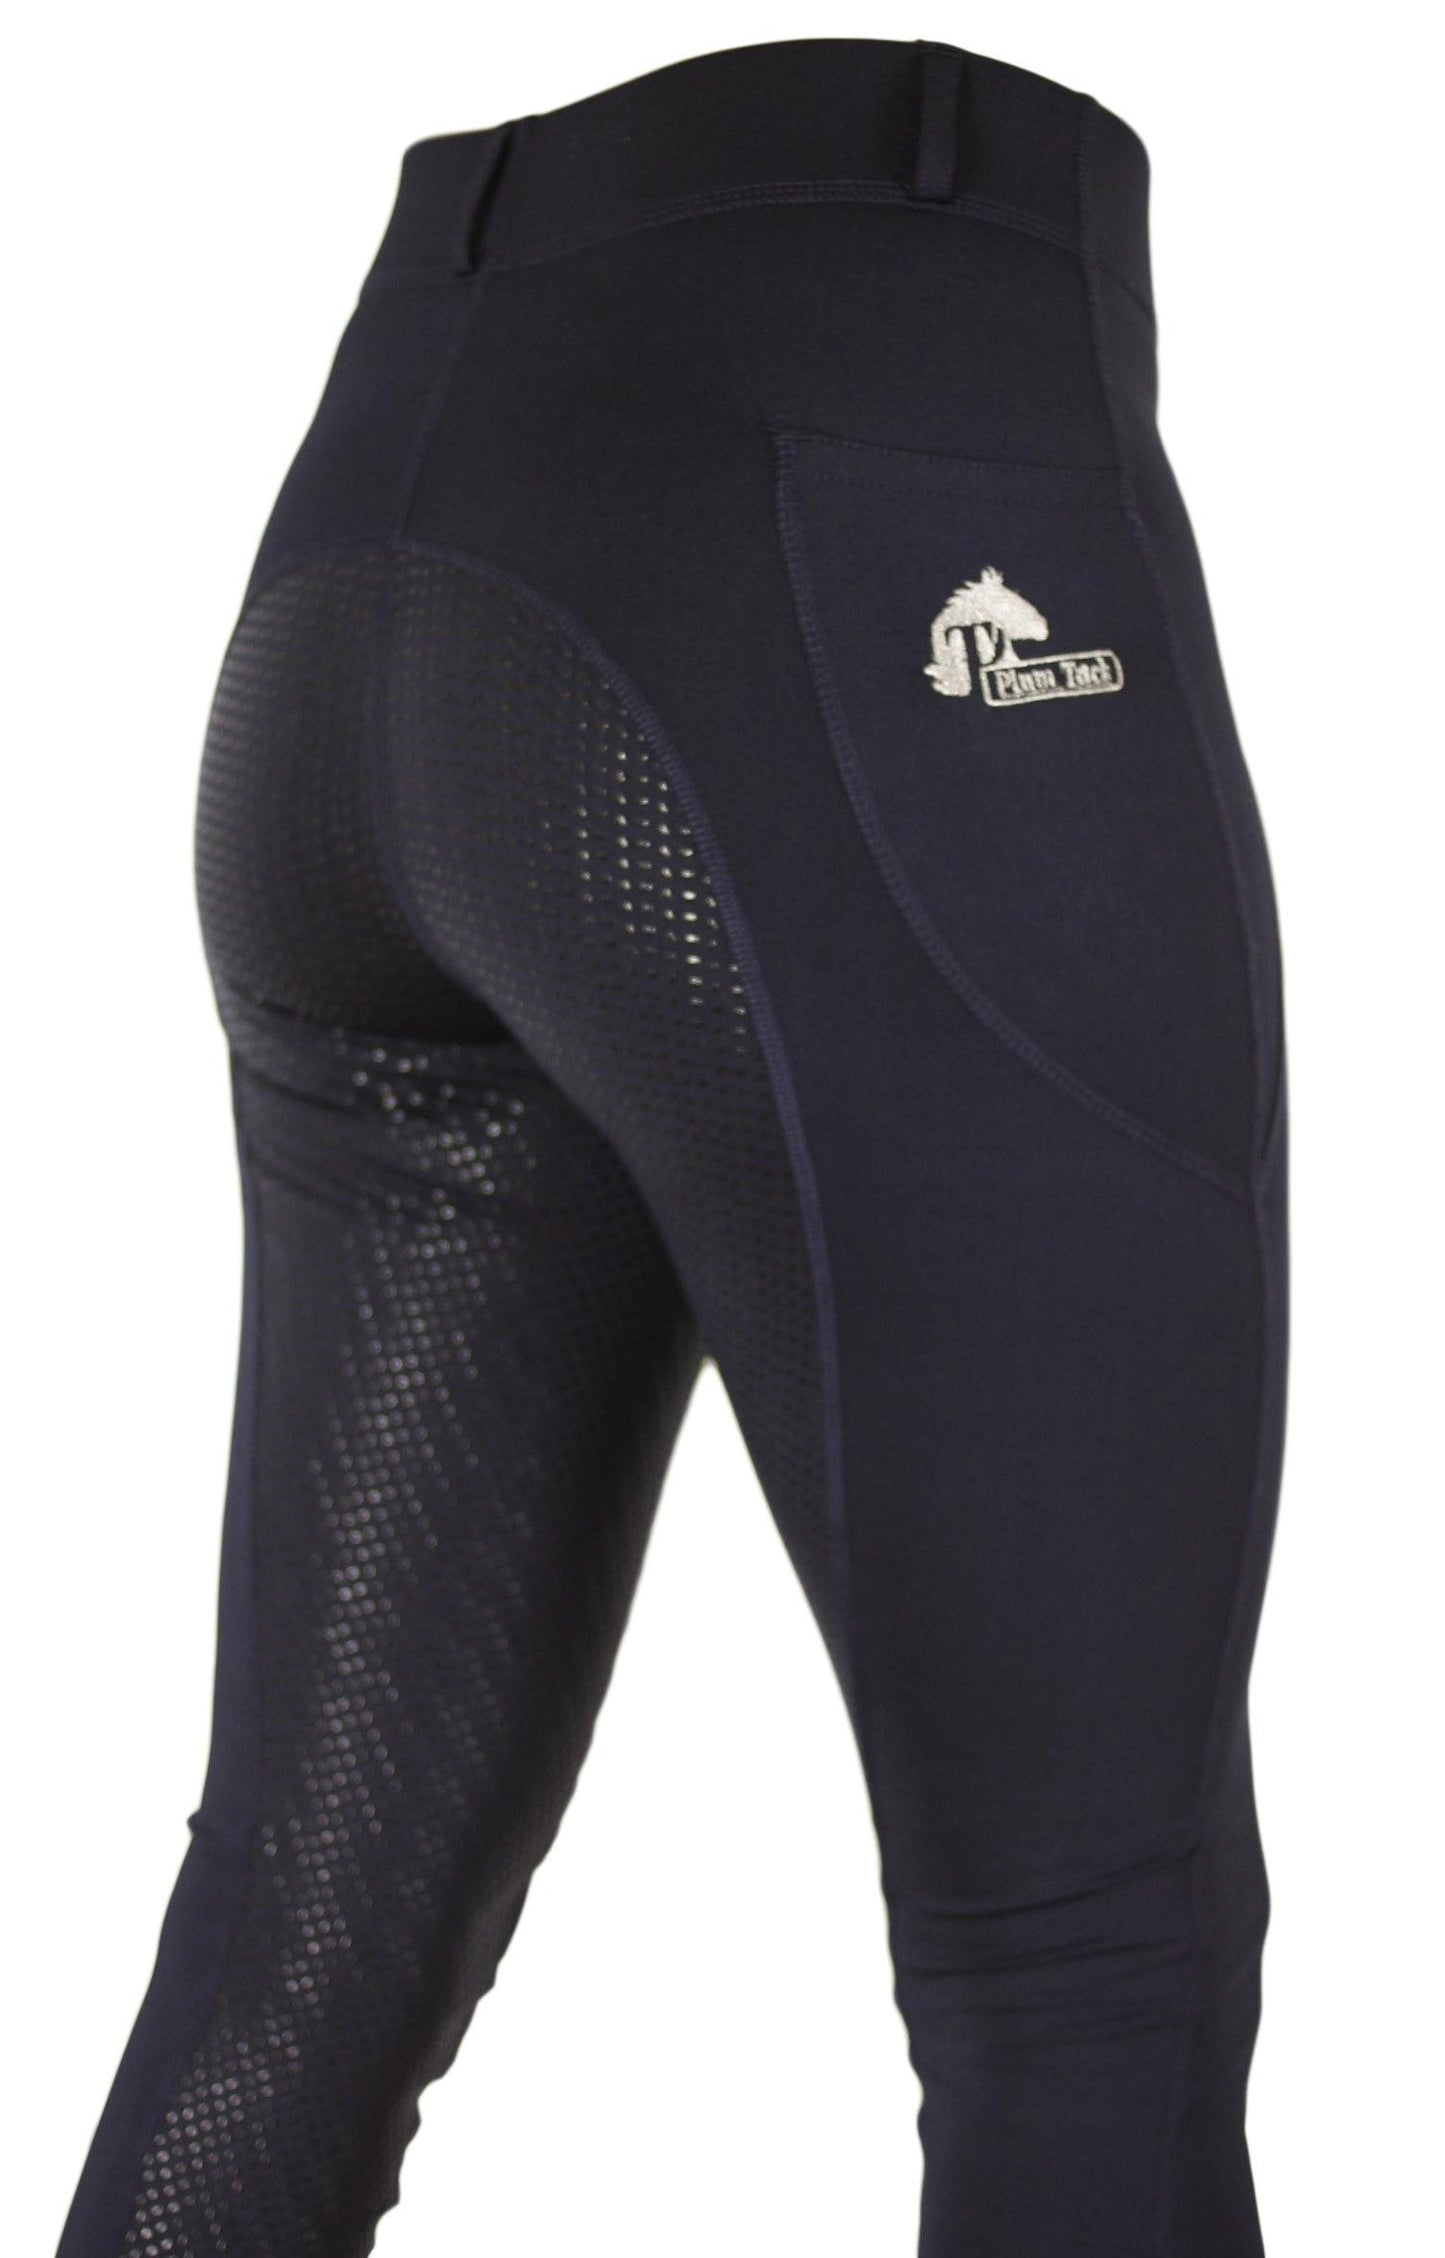 Rear view of navy blue Horse Riding Tights with logo detail.